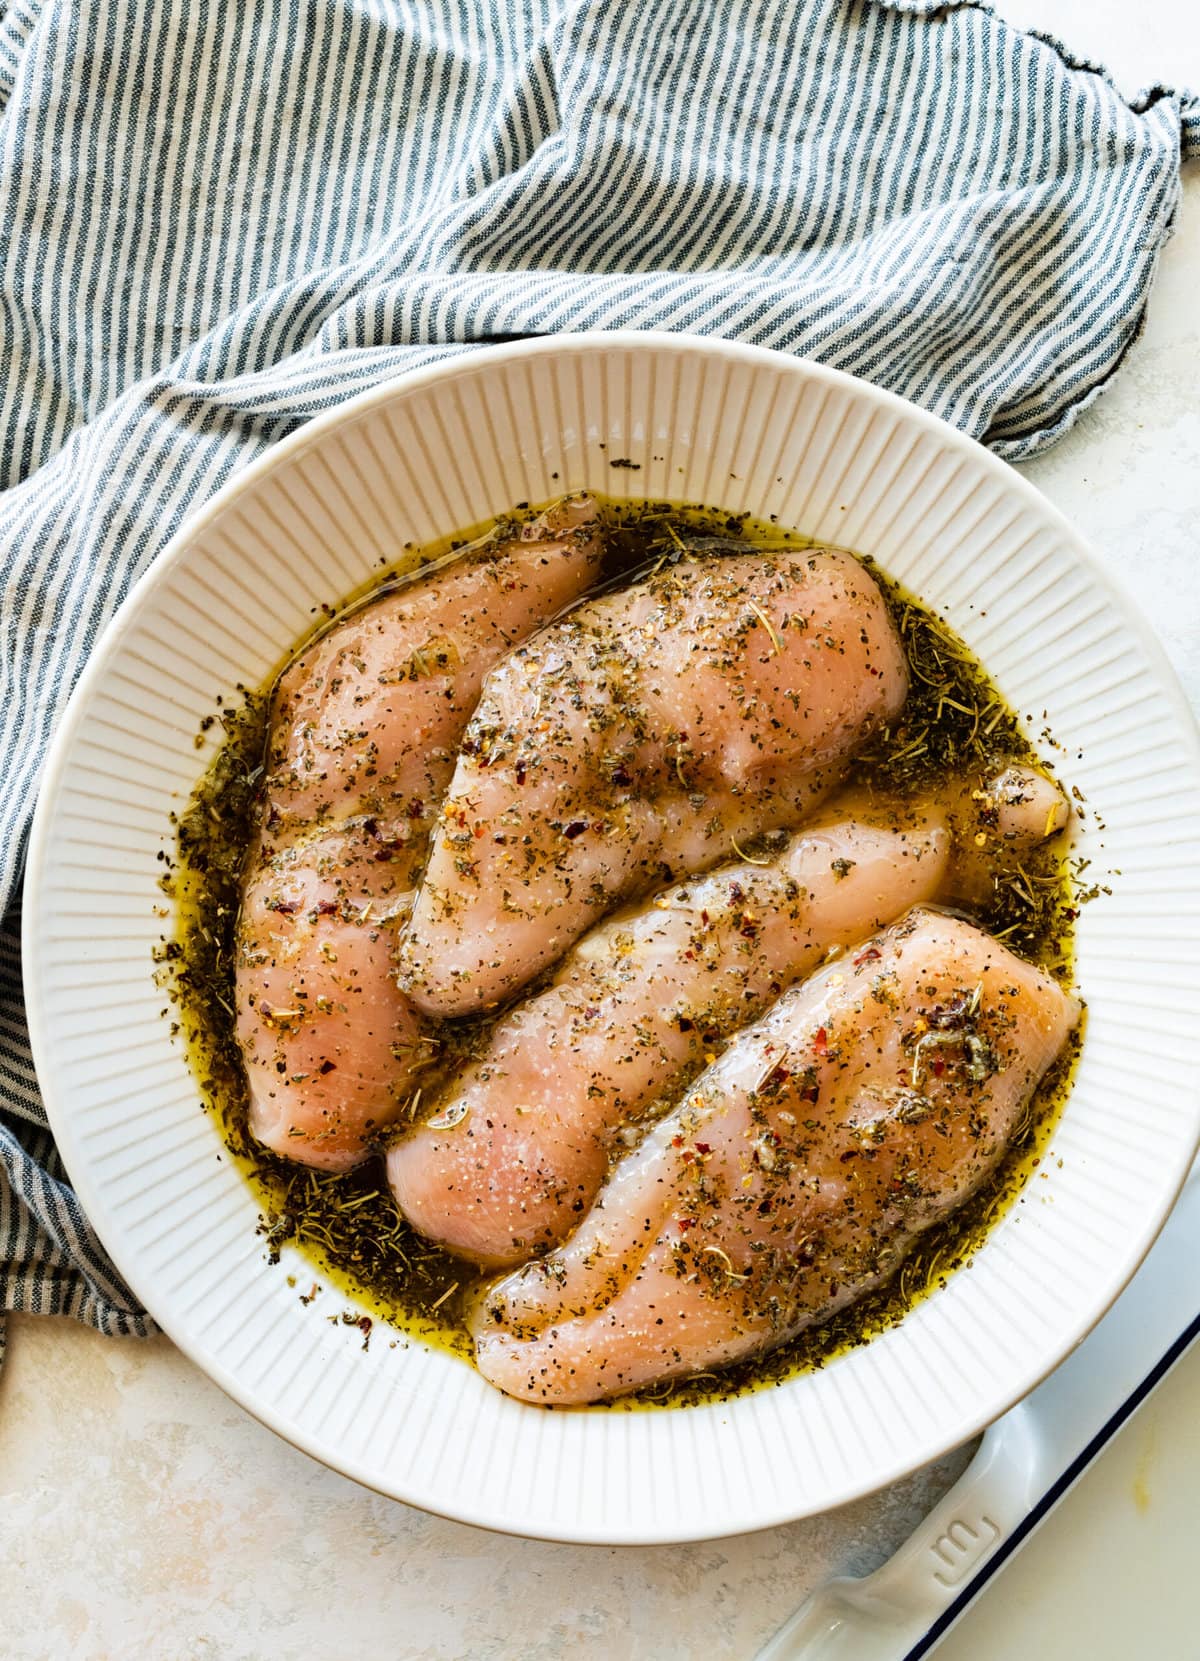 massaging the chicken with the olive oil and herbs.